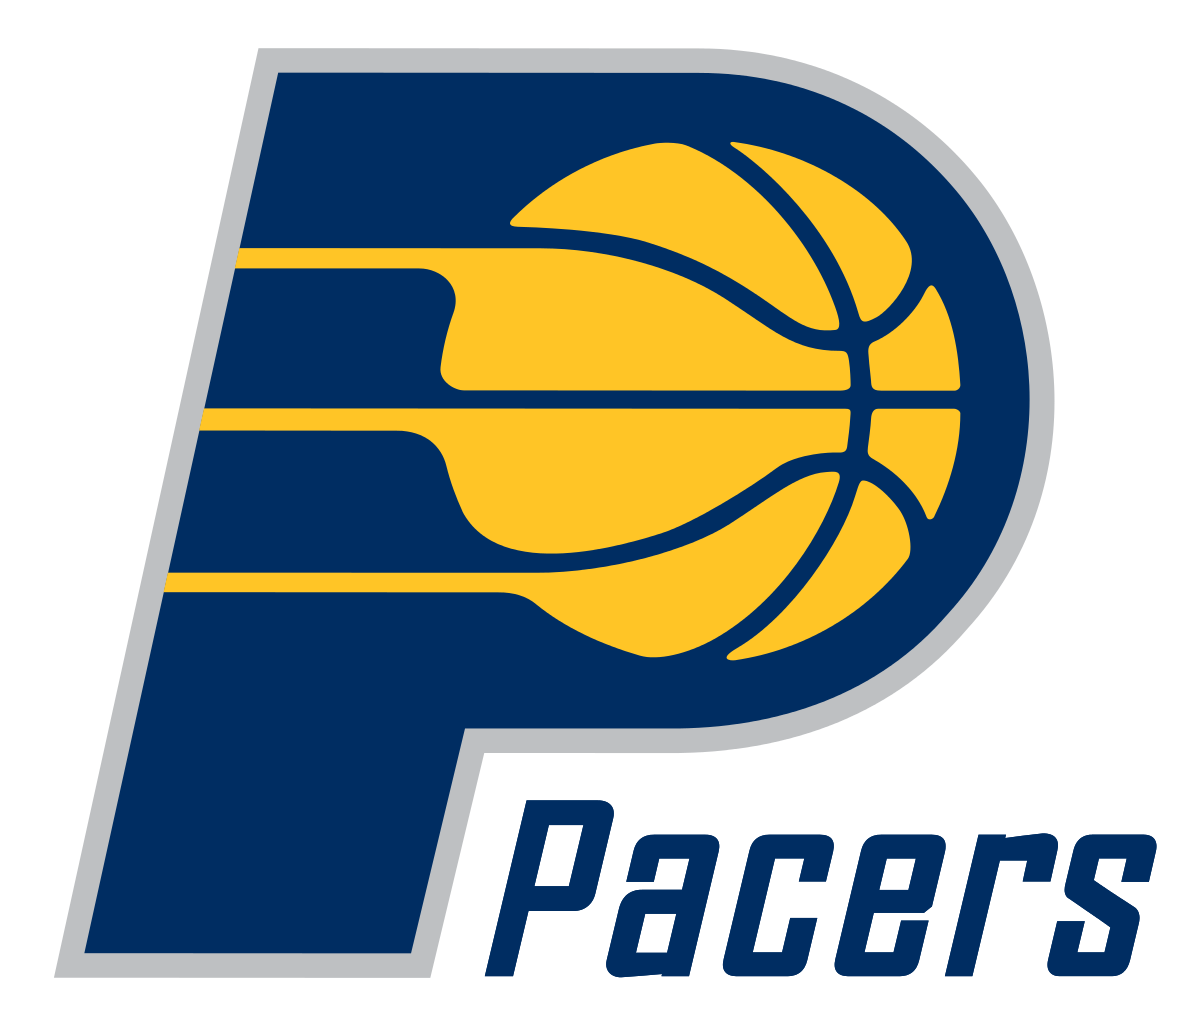 Indiana_Pacers.svg.png